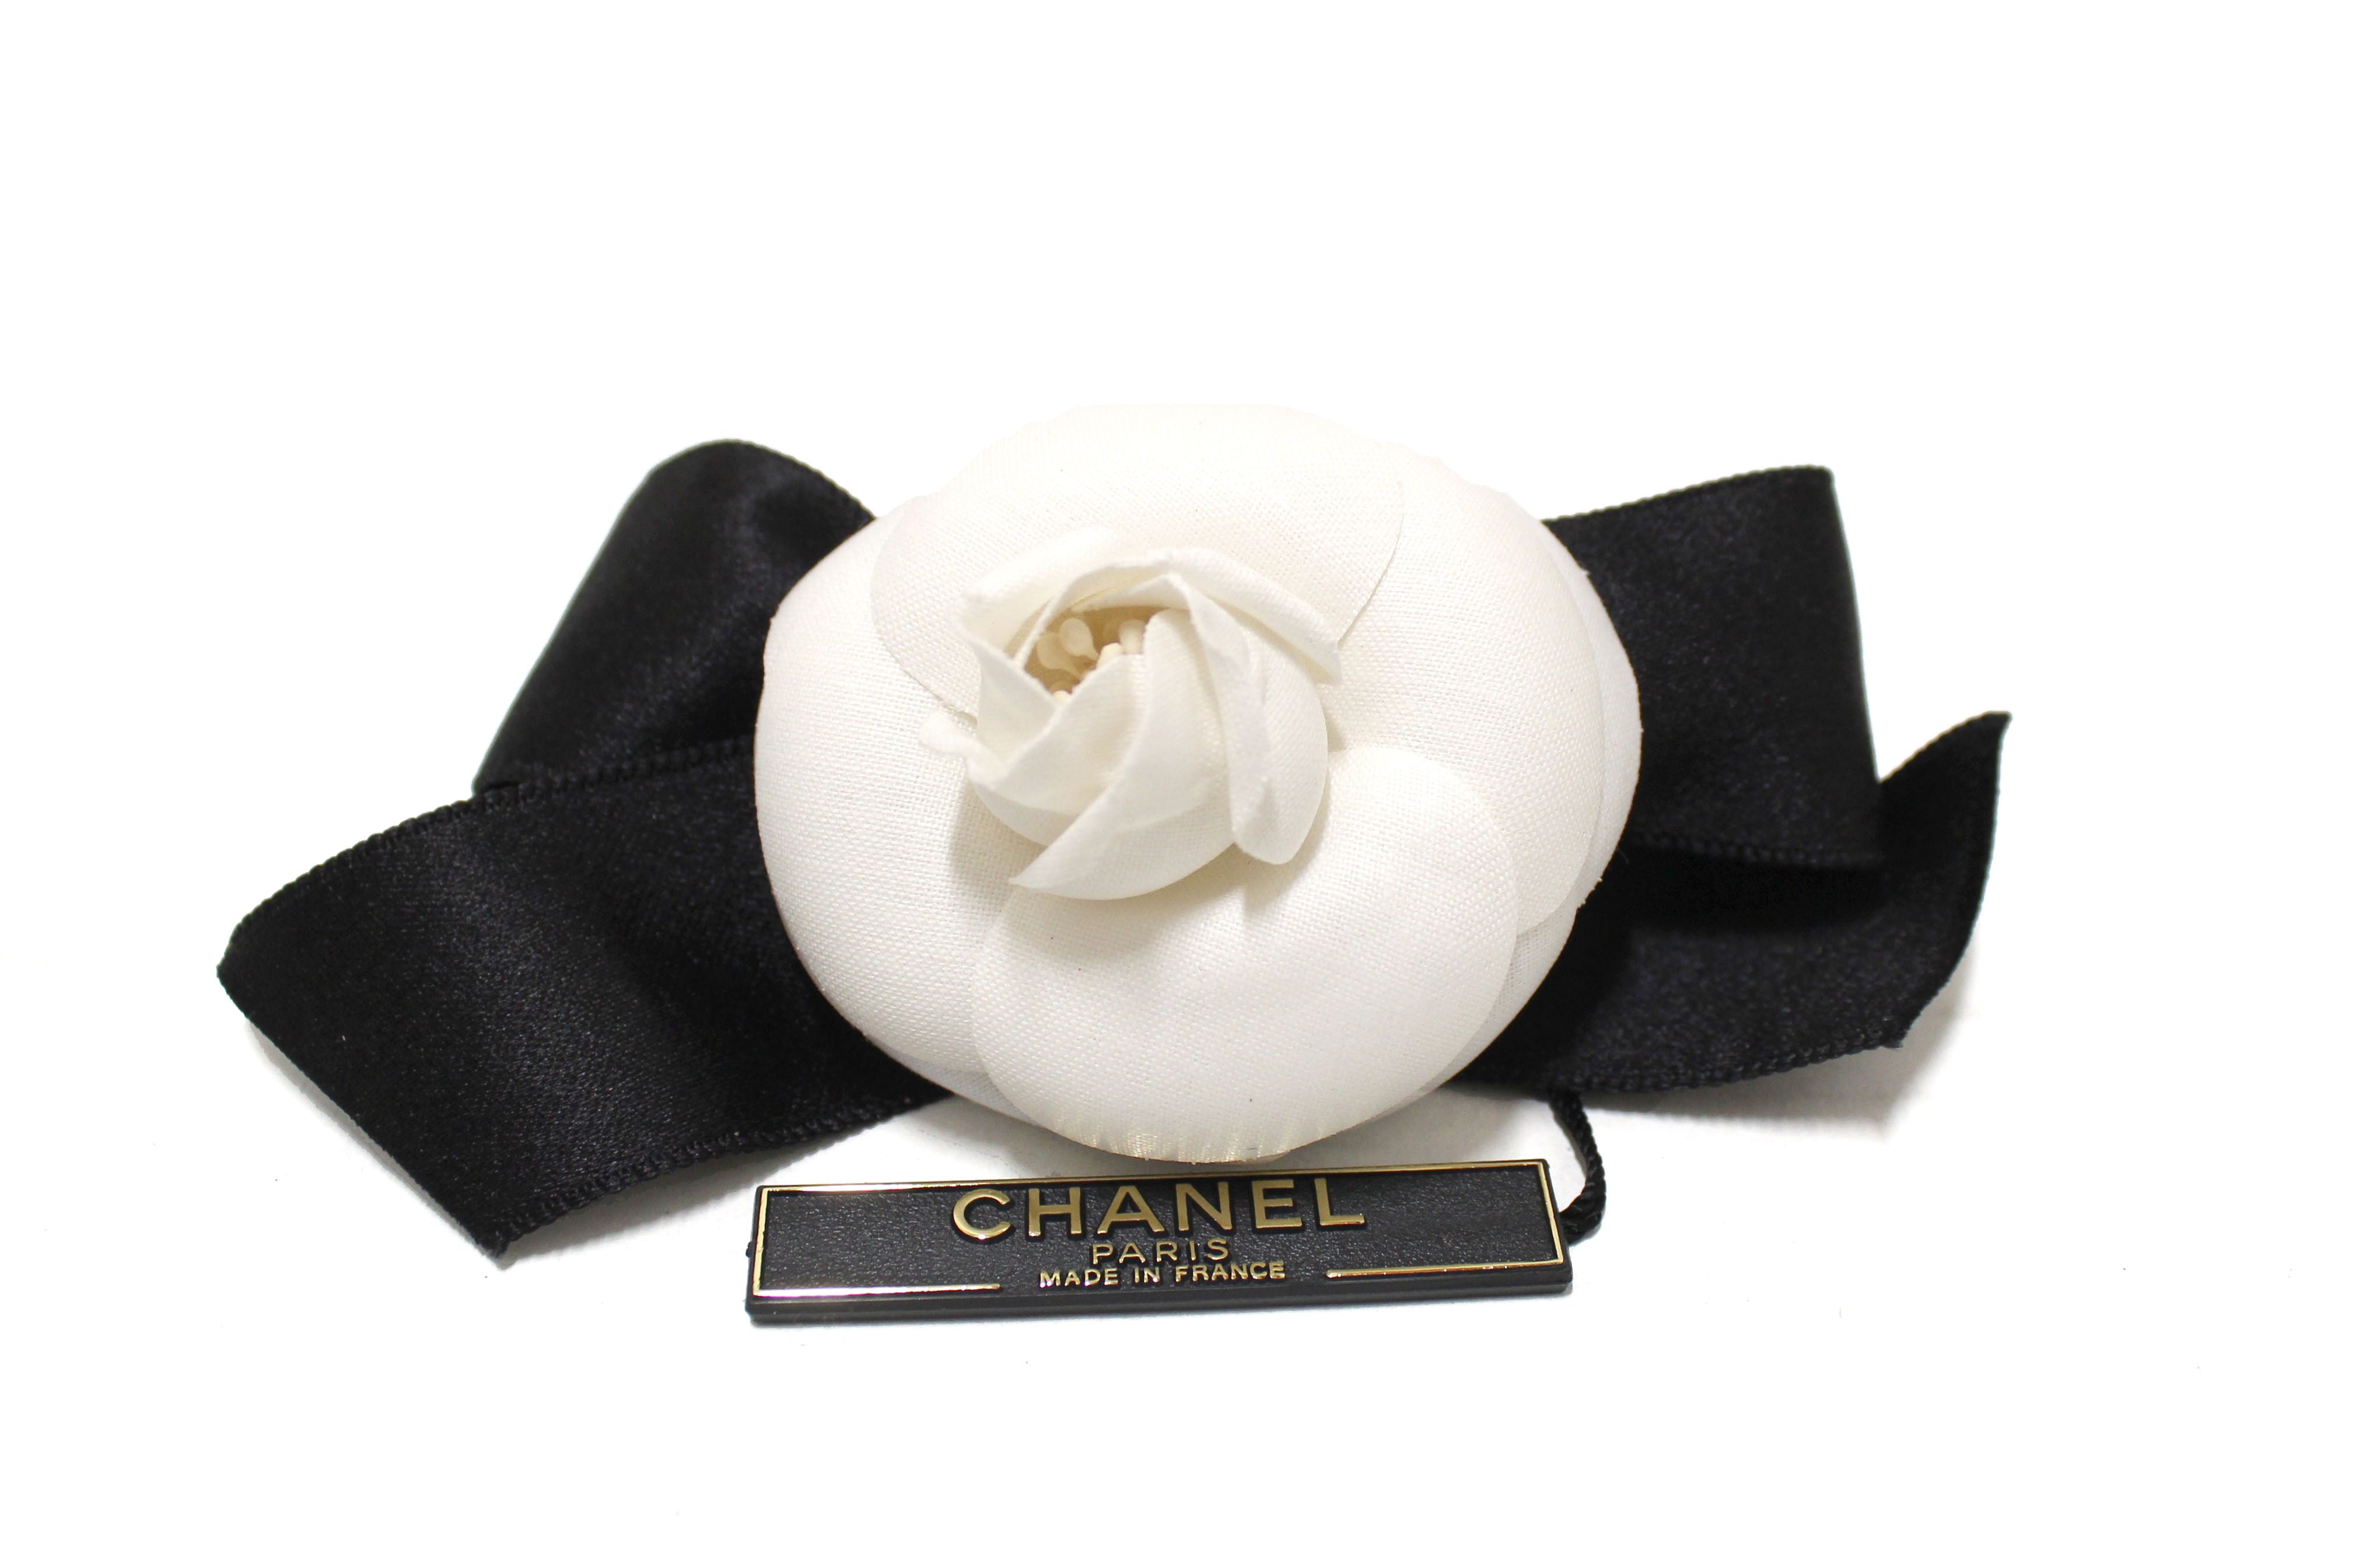 Authentic New Chanel Black/White Camelia Flower Satin Bow Barrette Hair Clip Hair Accessory